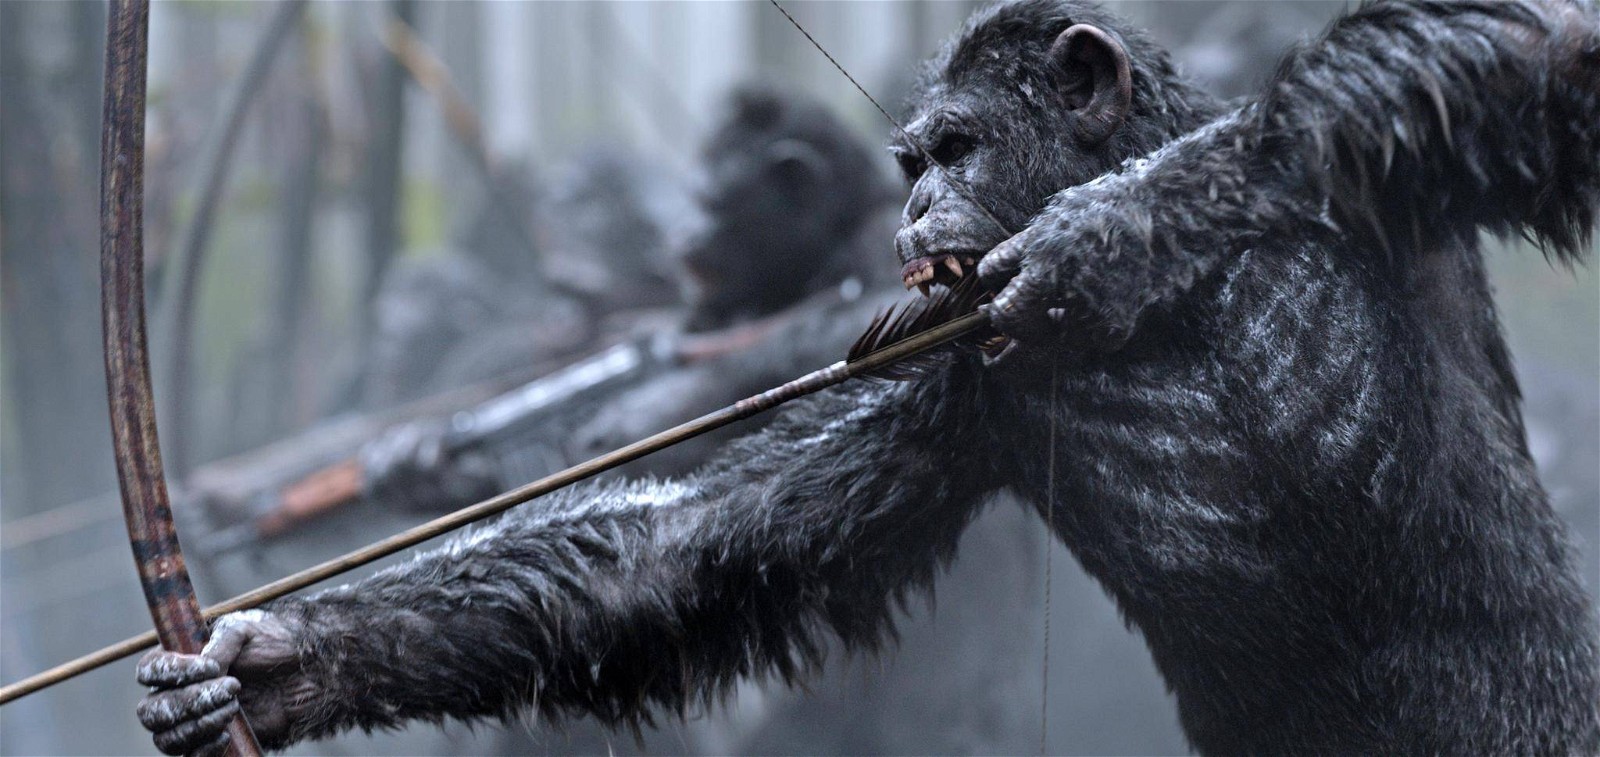 A still from War for the Planet of the Apes (2017)